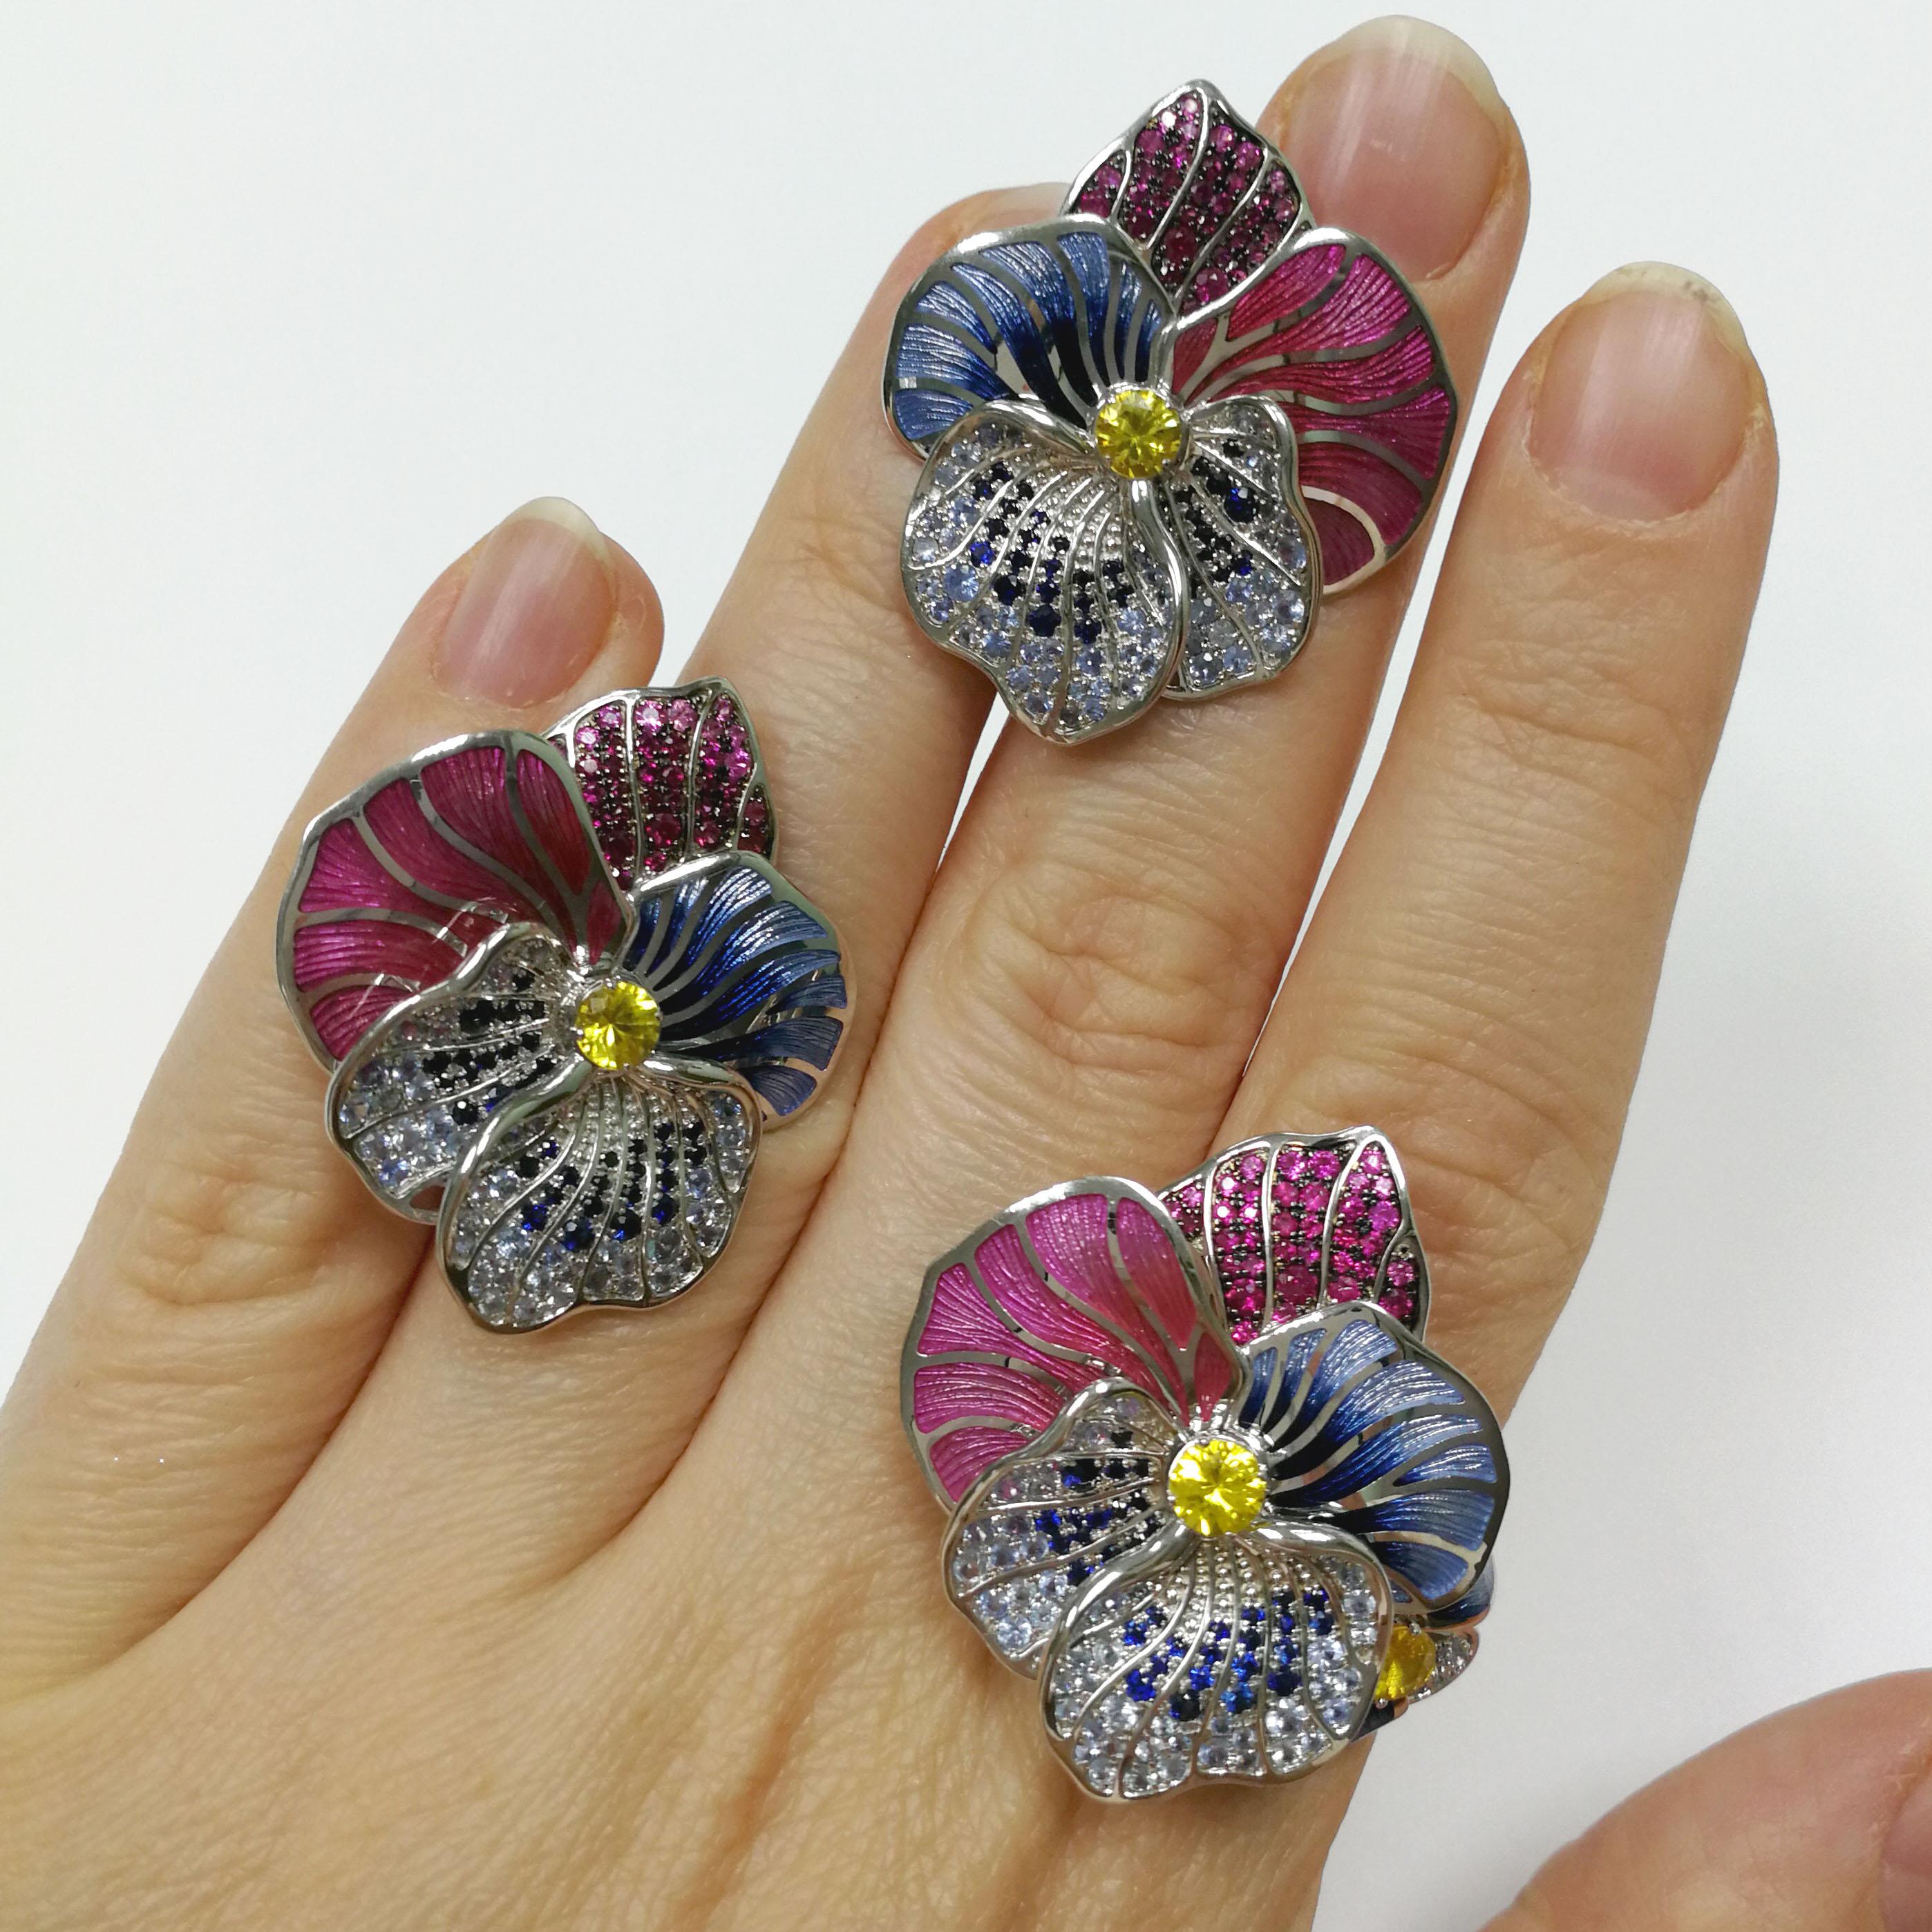 Yellow Pink Blue Sapphires Ruby 18 Karat White Gold Violet Suite
Violets have long been a symbol of love and loyalty. For artists, violets are certainly an inexhaustible source of inspiration. So our designers did not pass by. Big and small flowers